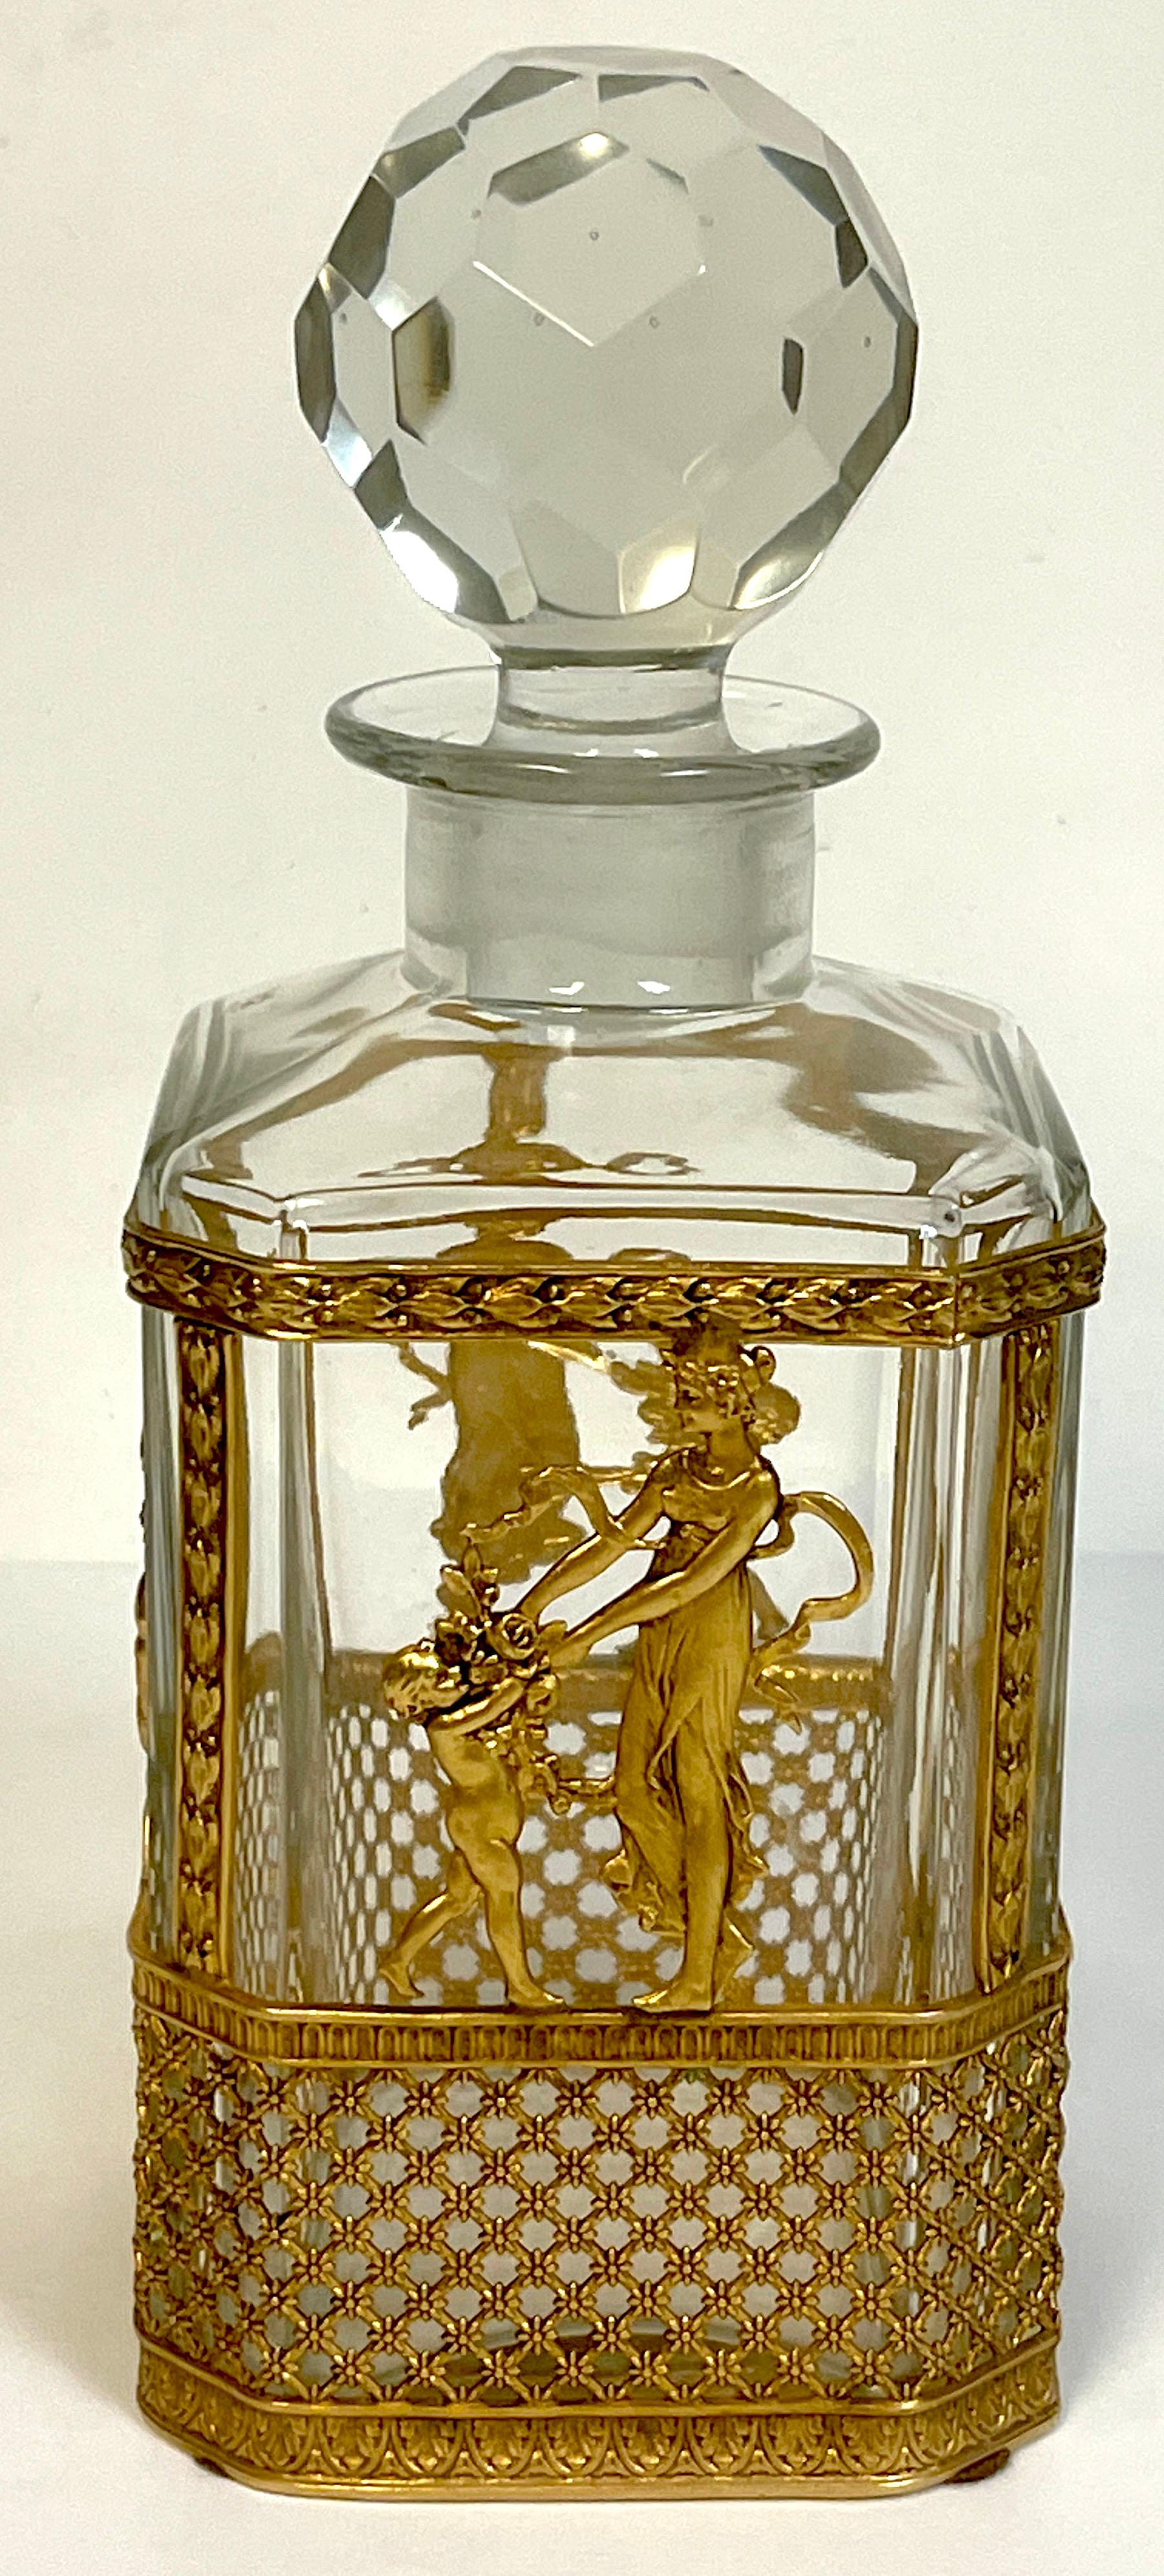 Empire Baccarat Style Ormolu Mounted Decanter In Good Condition For Sale In West Palm Beach, FL